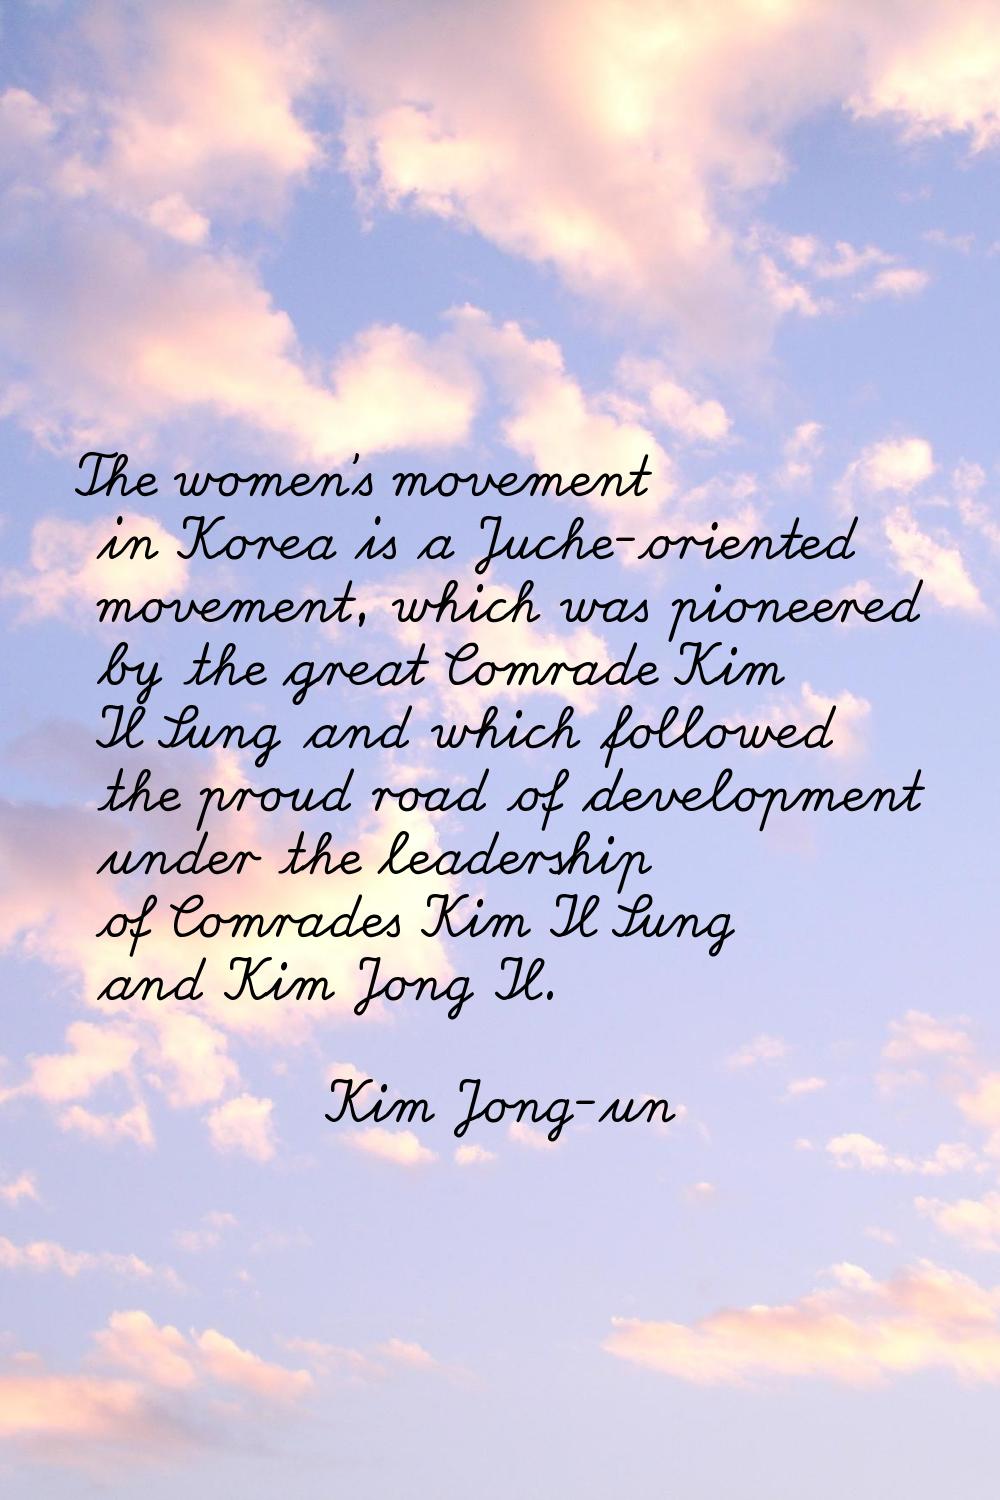 The women's movement in Korea is a Juche-oriented movement, which was pioneered by the great Comrad